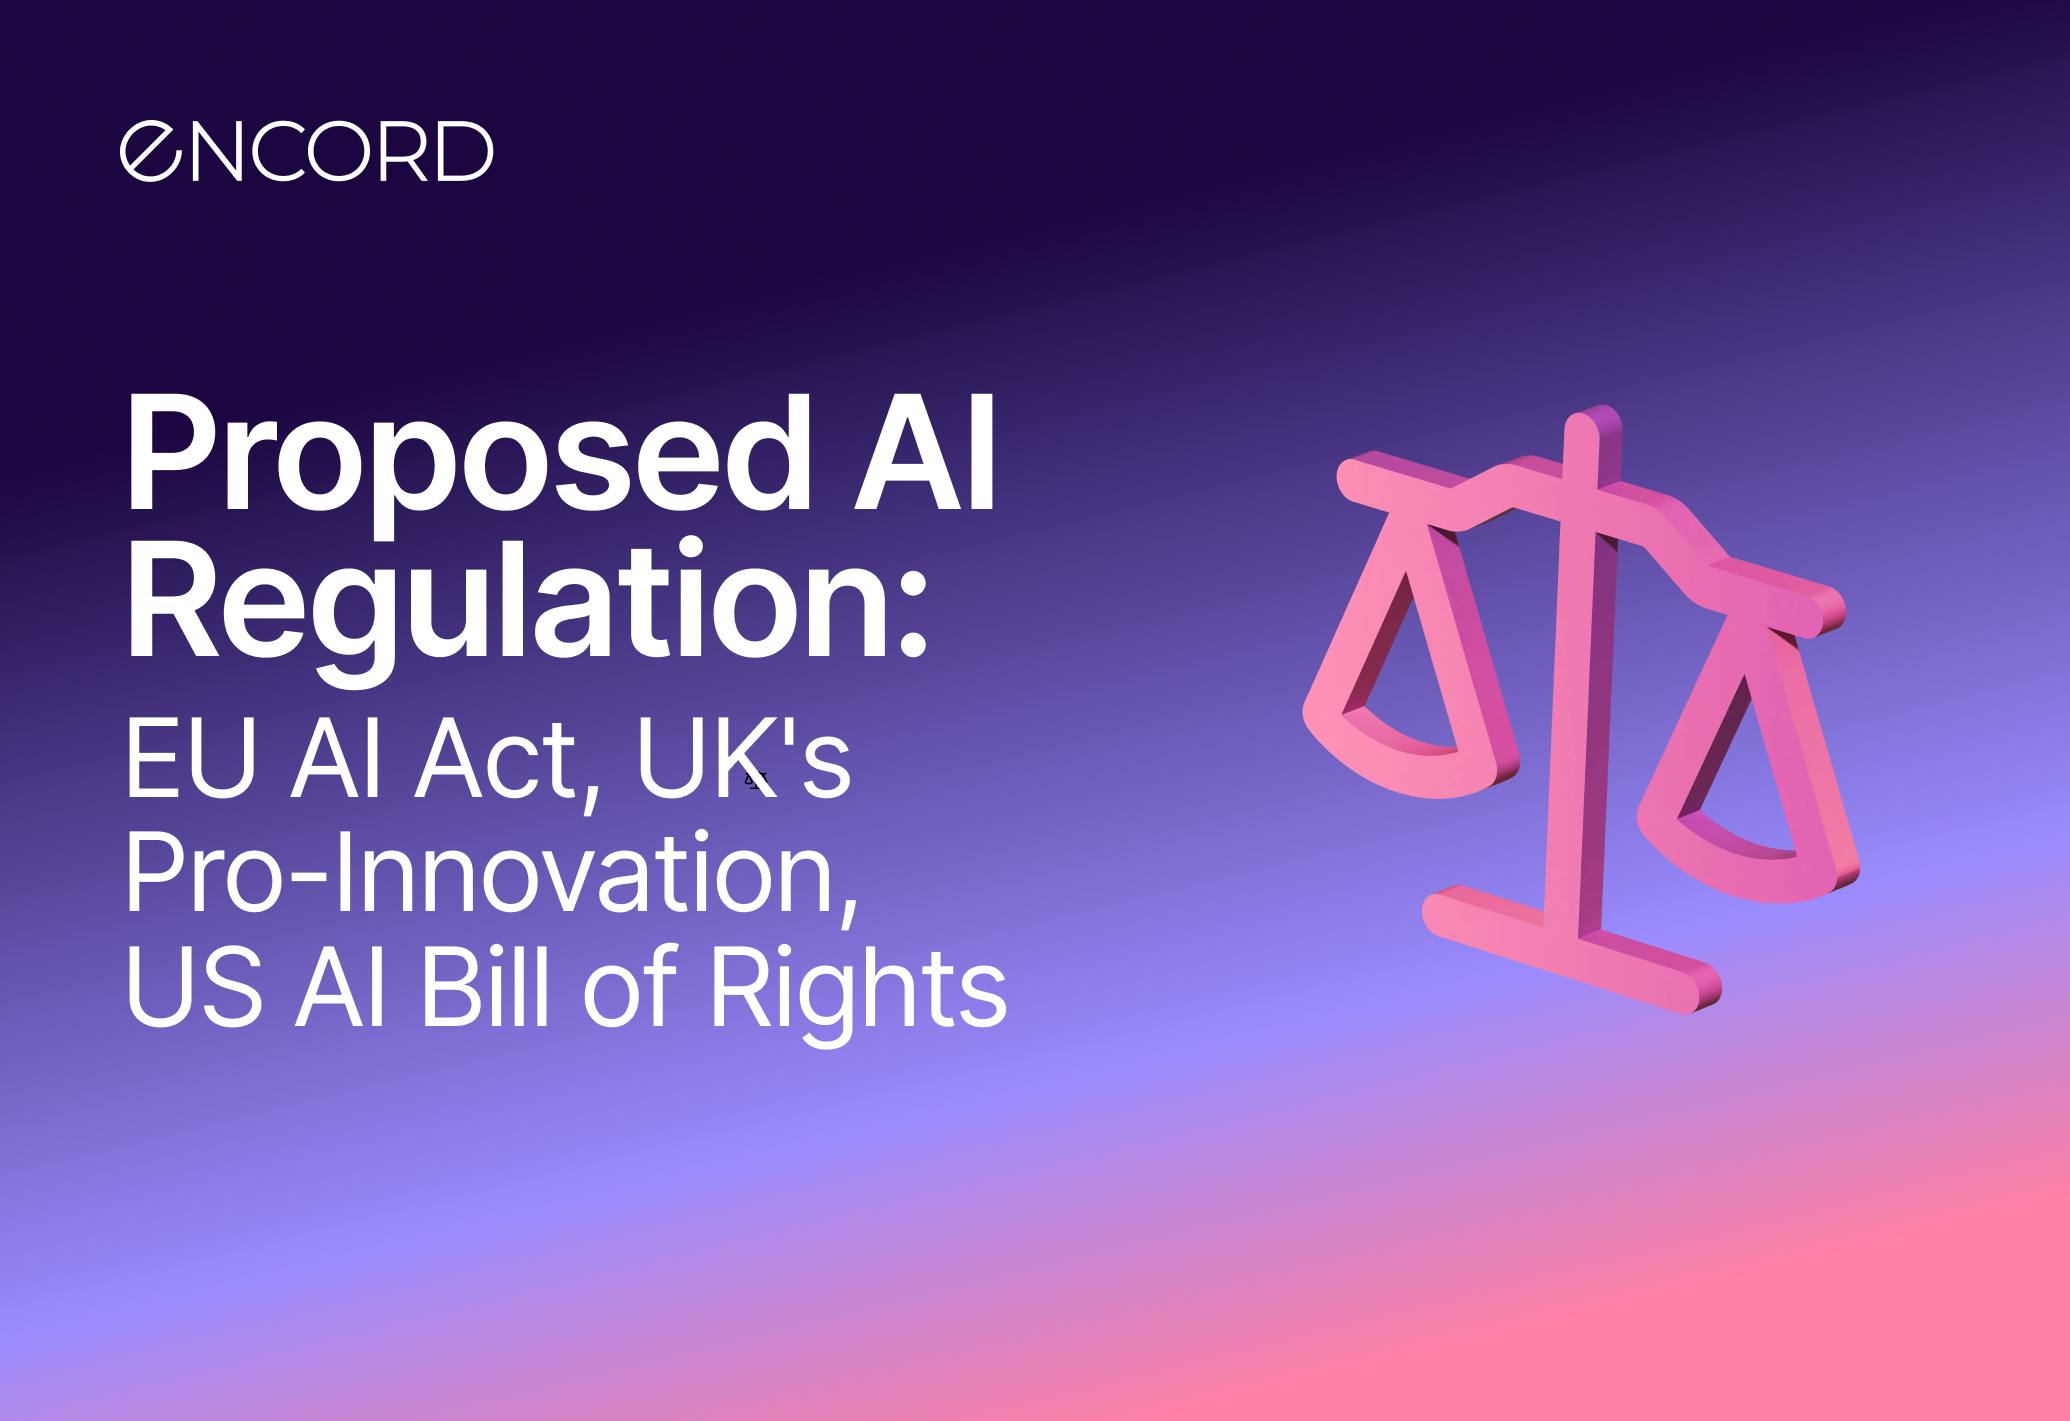 Proposed AI Regulation in the EU, UK, and US